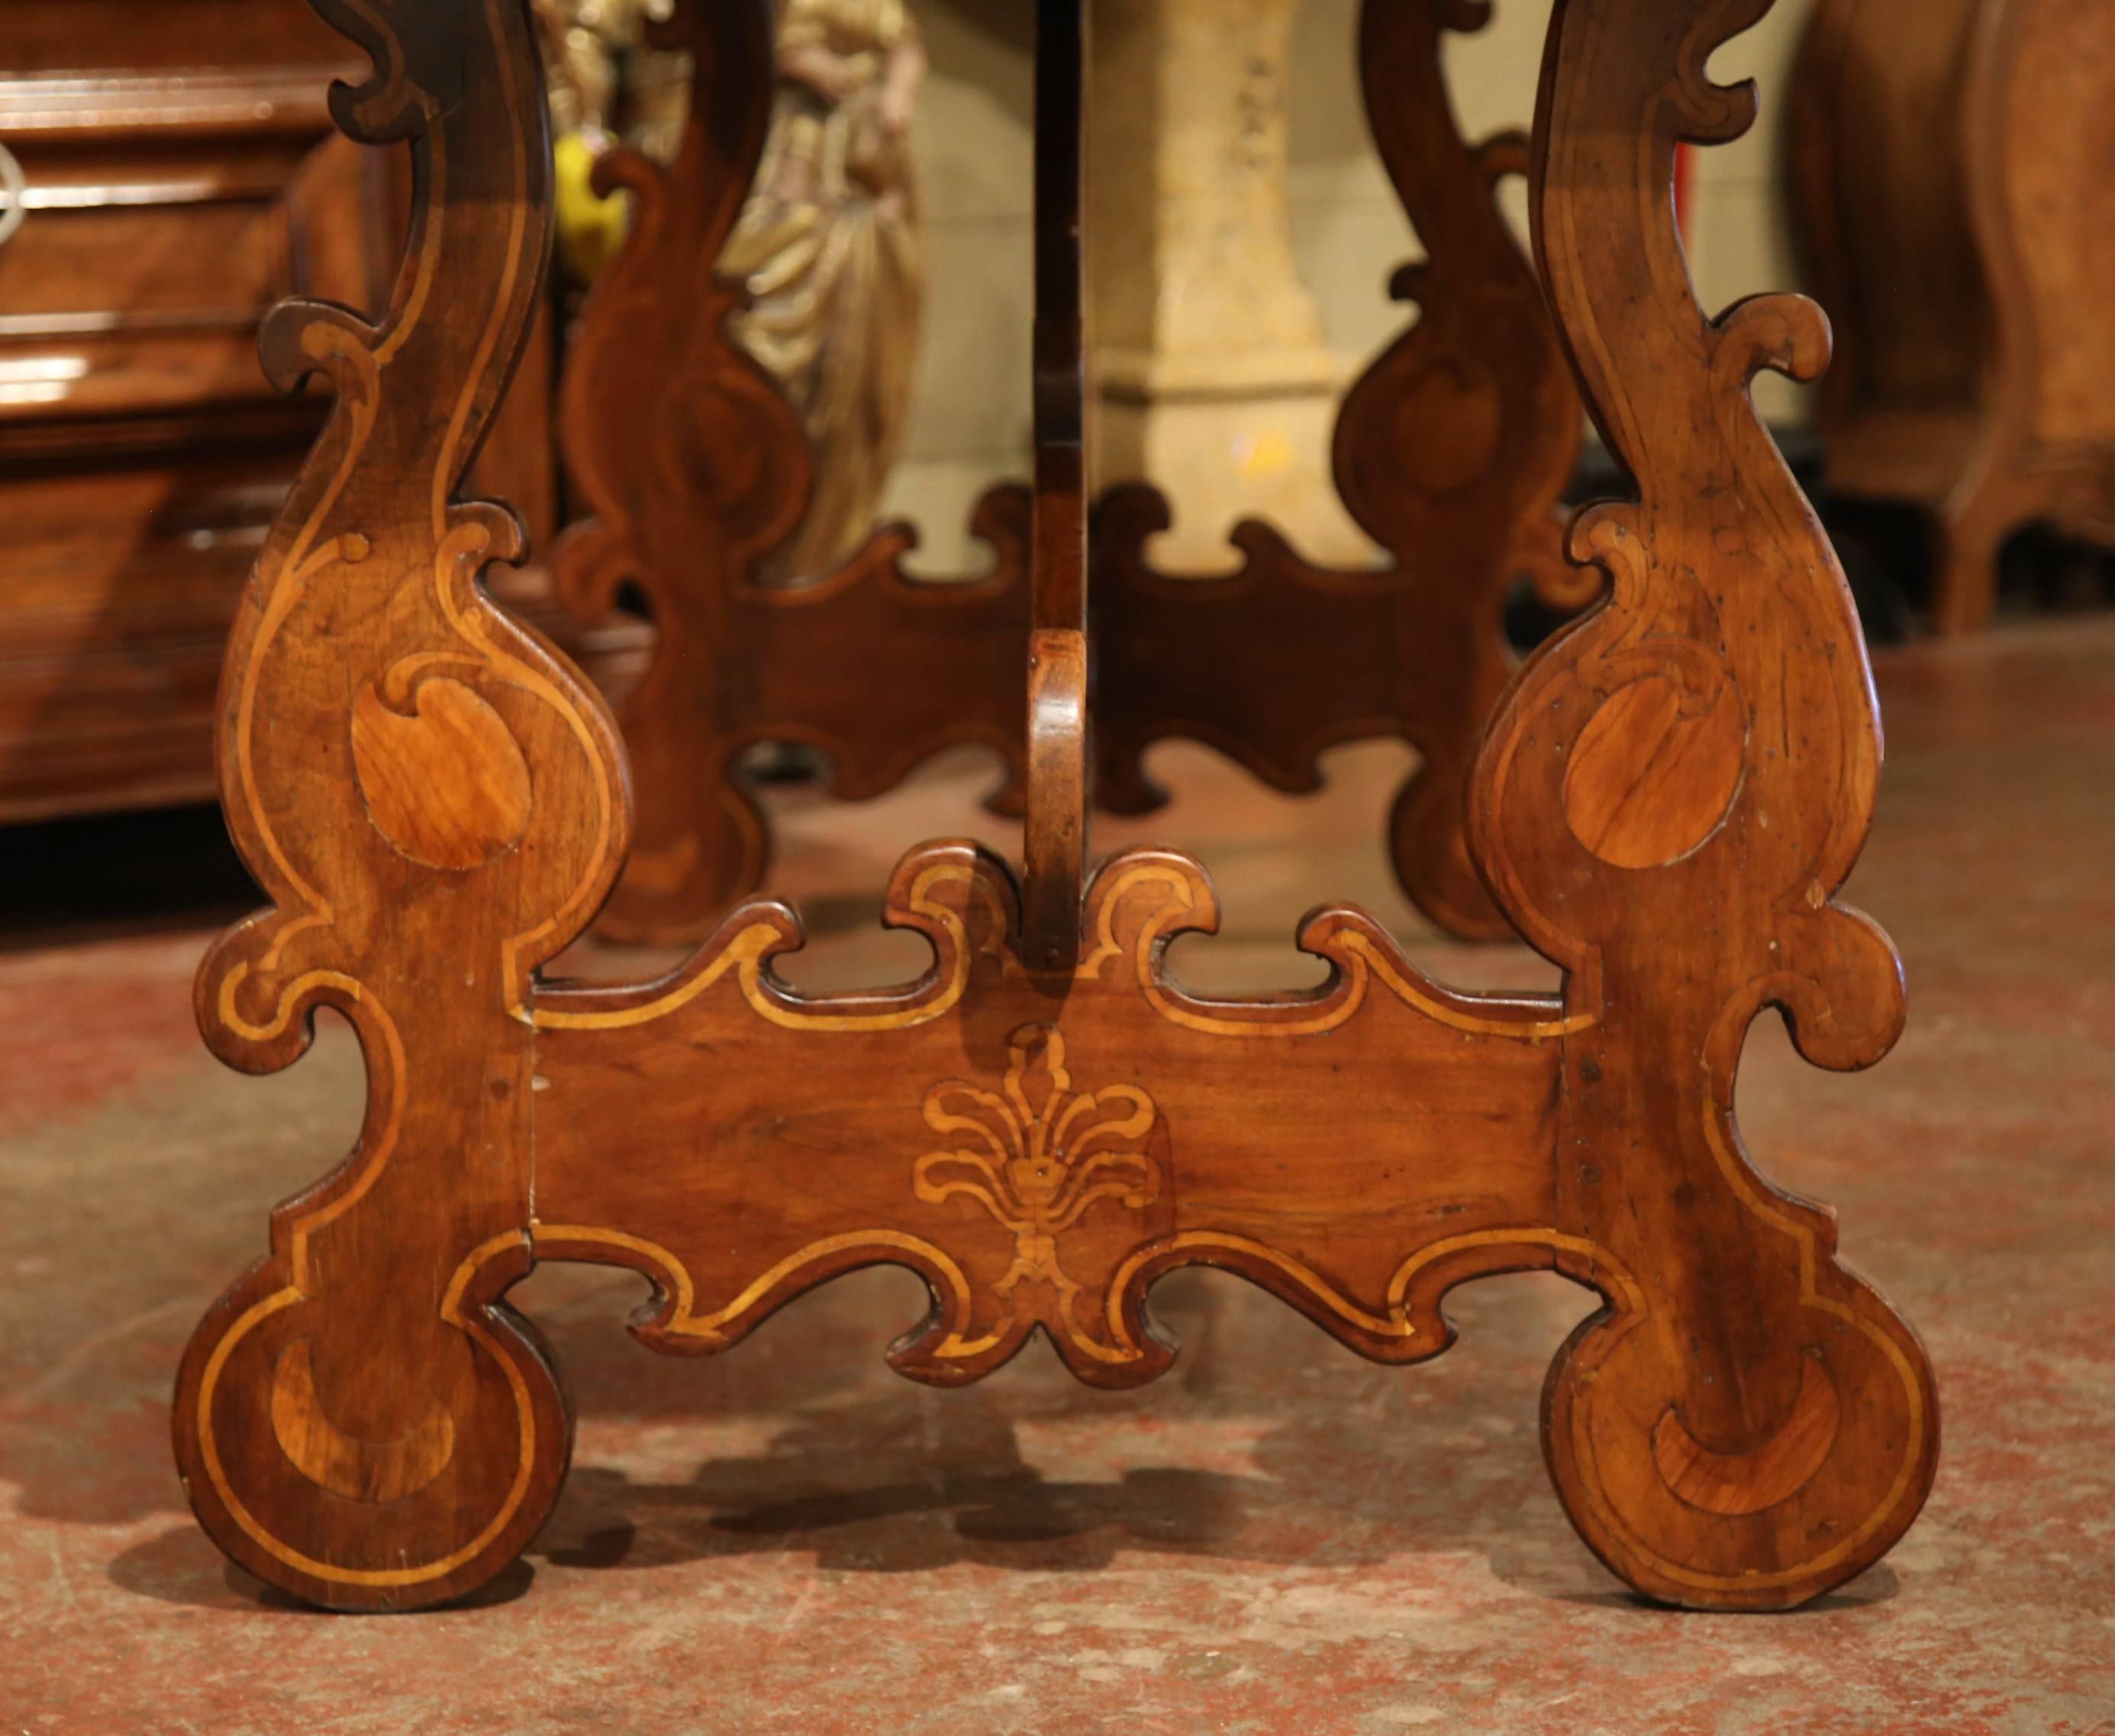 19th Century Italian Carved Walnut Trestle Table with Decorative Inlay Motifs 2